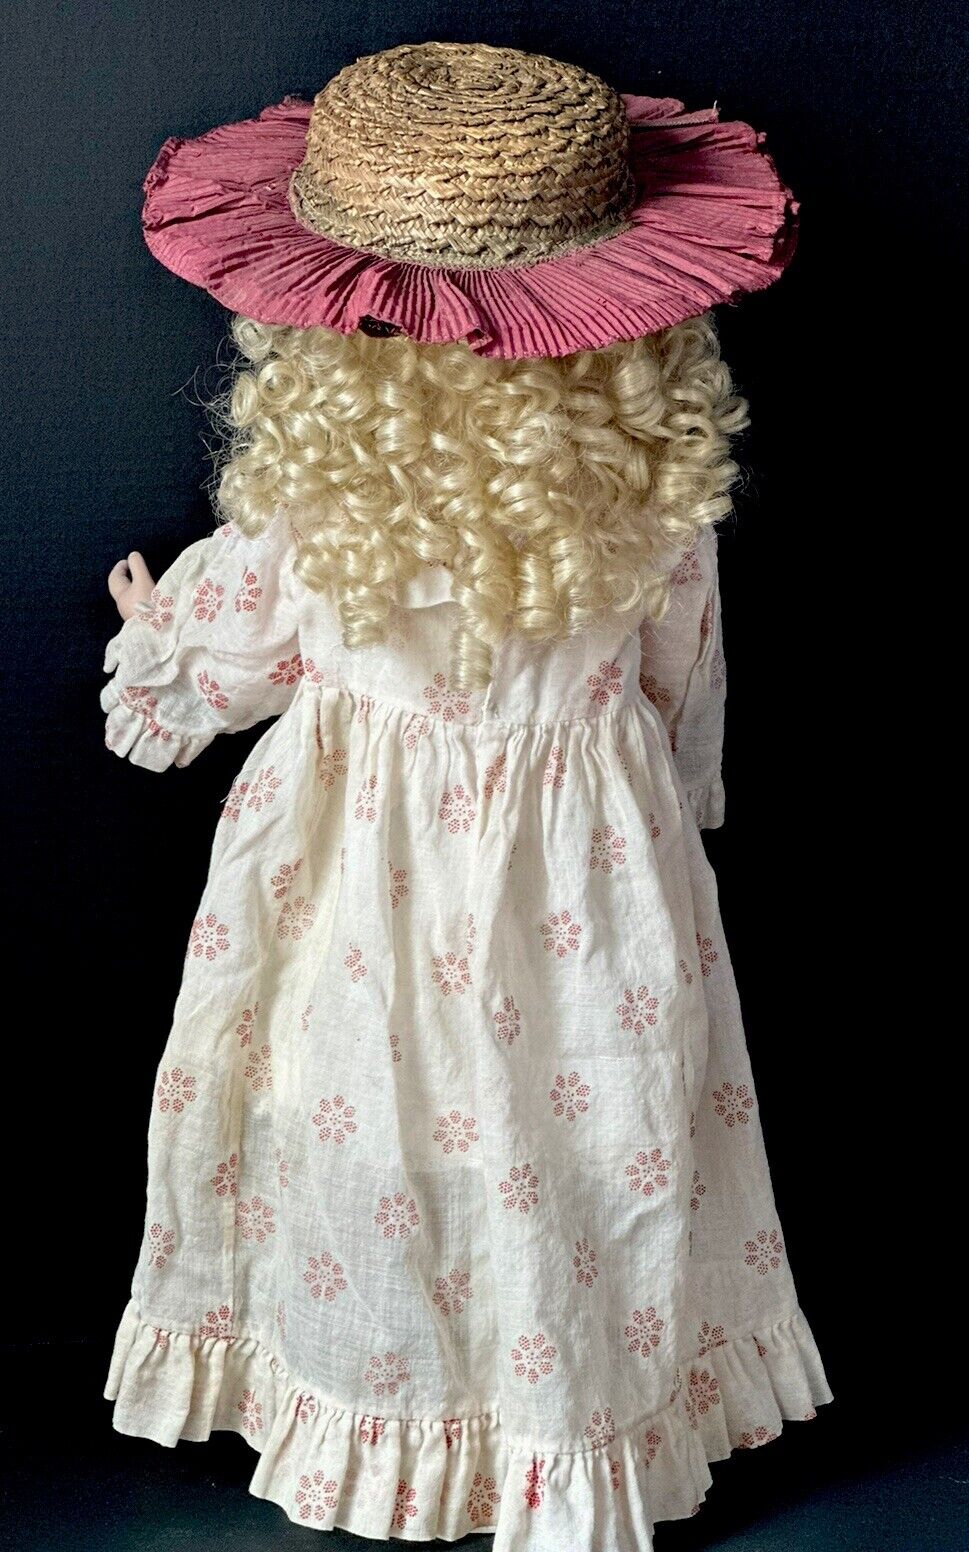 Artist Reproduction Of “Hilary” by Dianna Effner 23” Porcelain Doll French Body